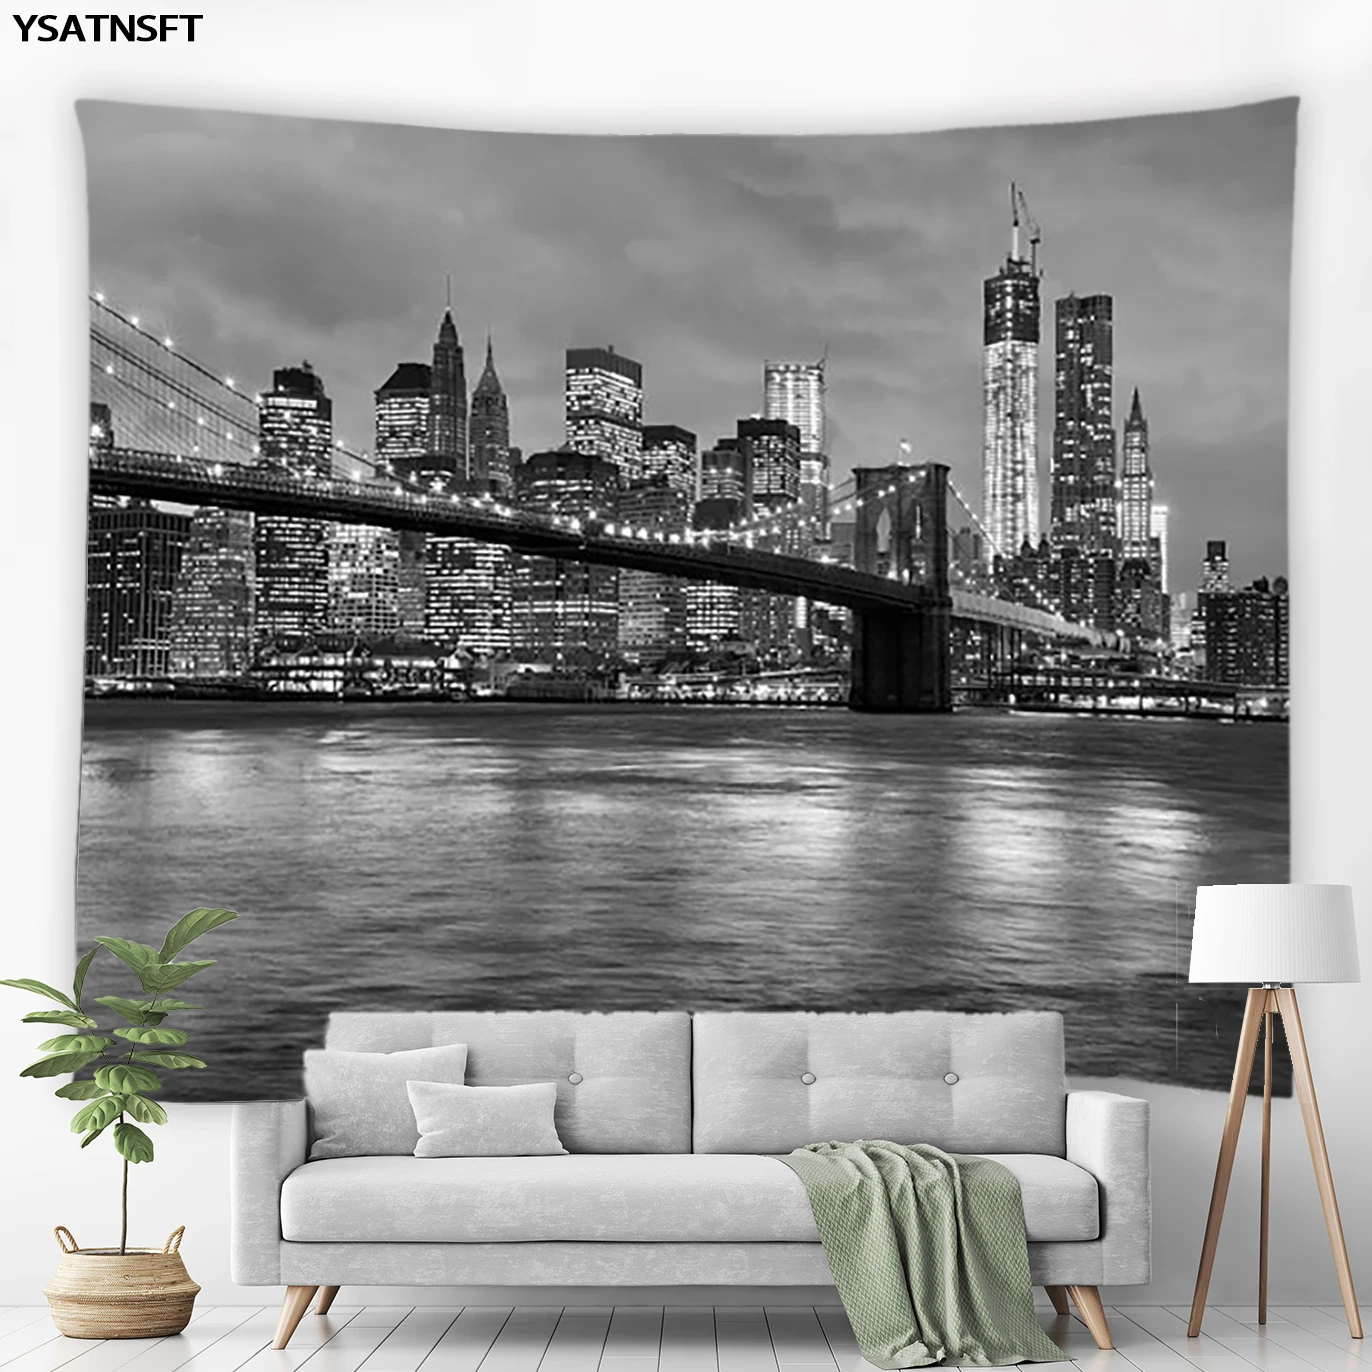 

City Architecture Landscape Tapestry New York City Center Building Scenery Wall Hanging Hippie Tapestry Bedroom Tapestries Decor